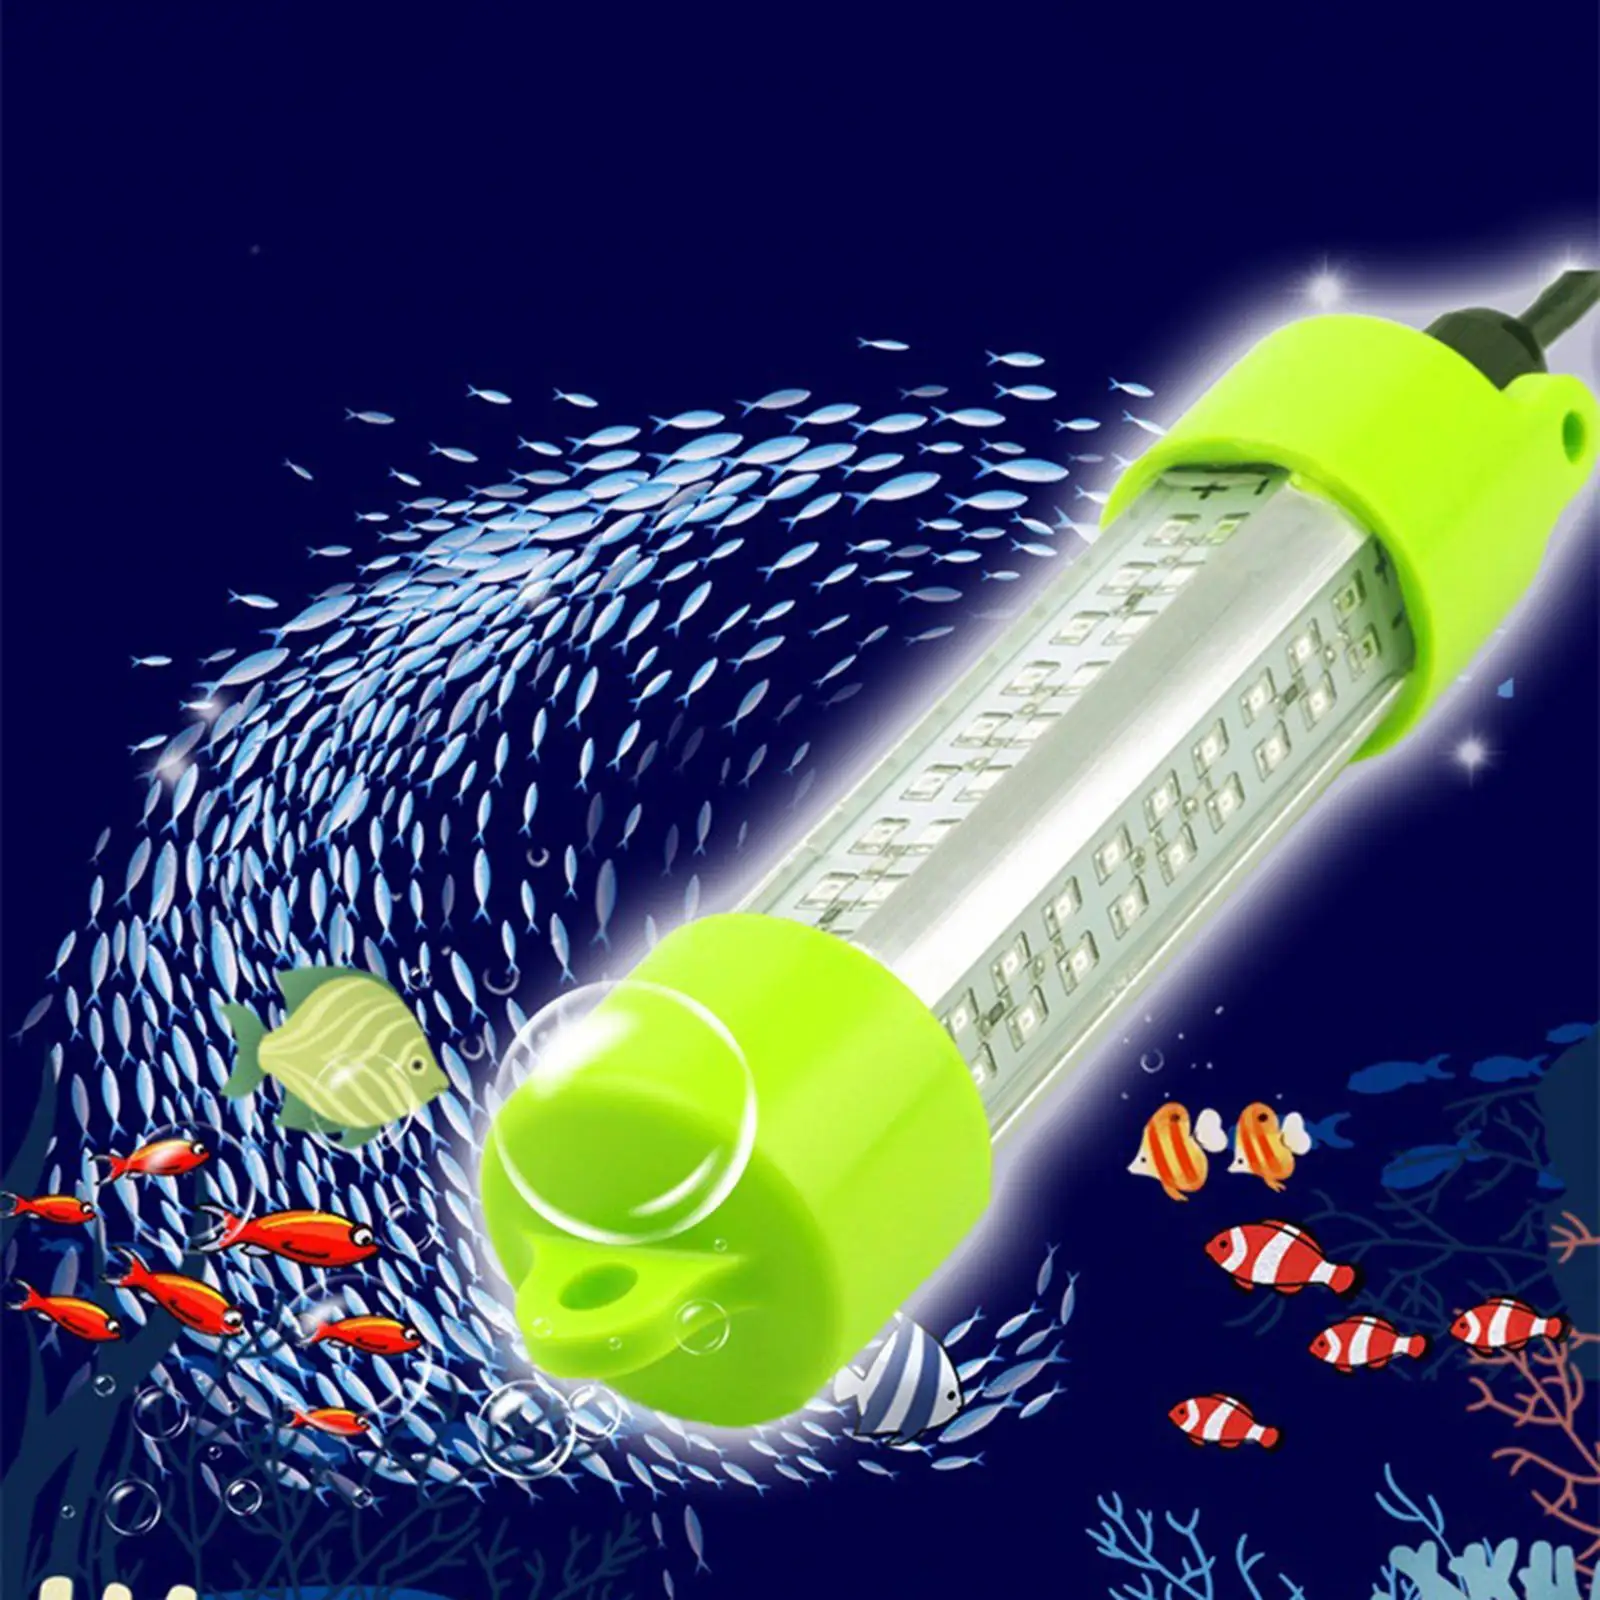 72 LEDs Submersible Fishing Light with 7.5m Cord Flashing Fishing Lamp Underwater Fishing Light